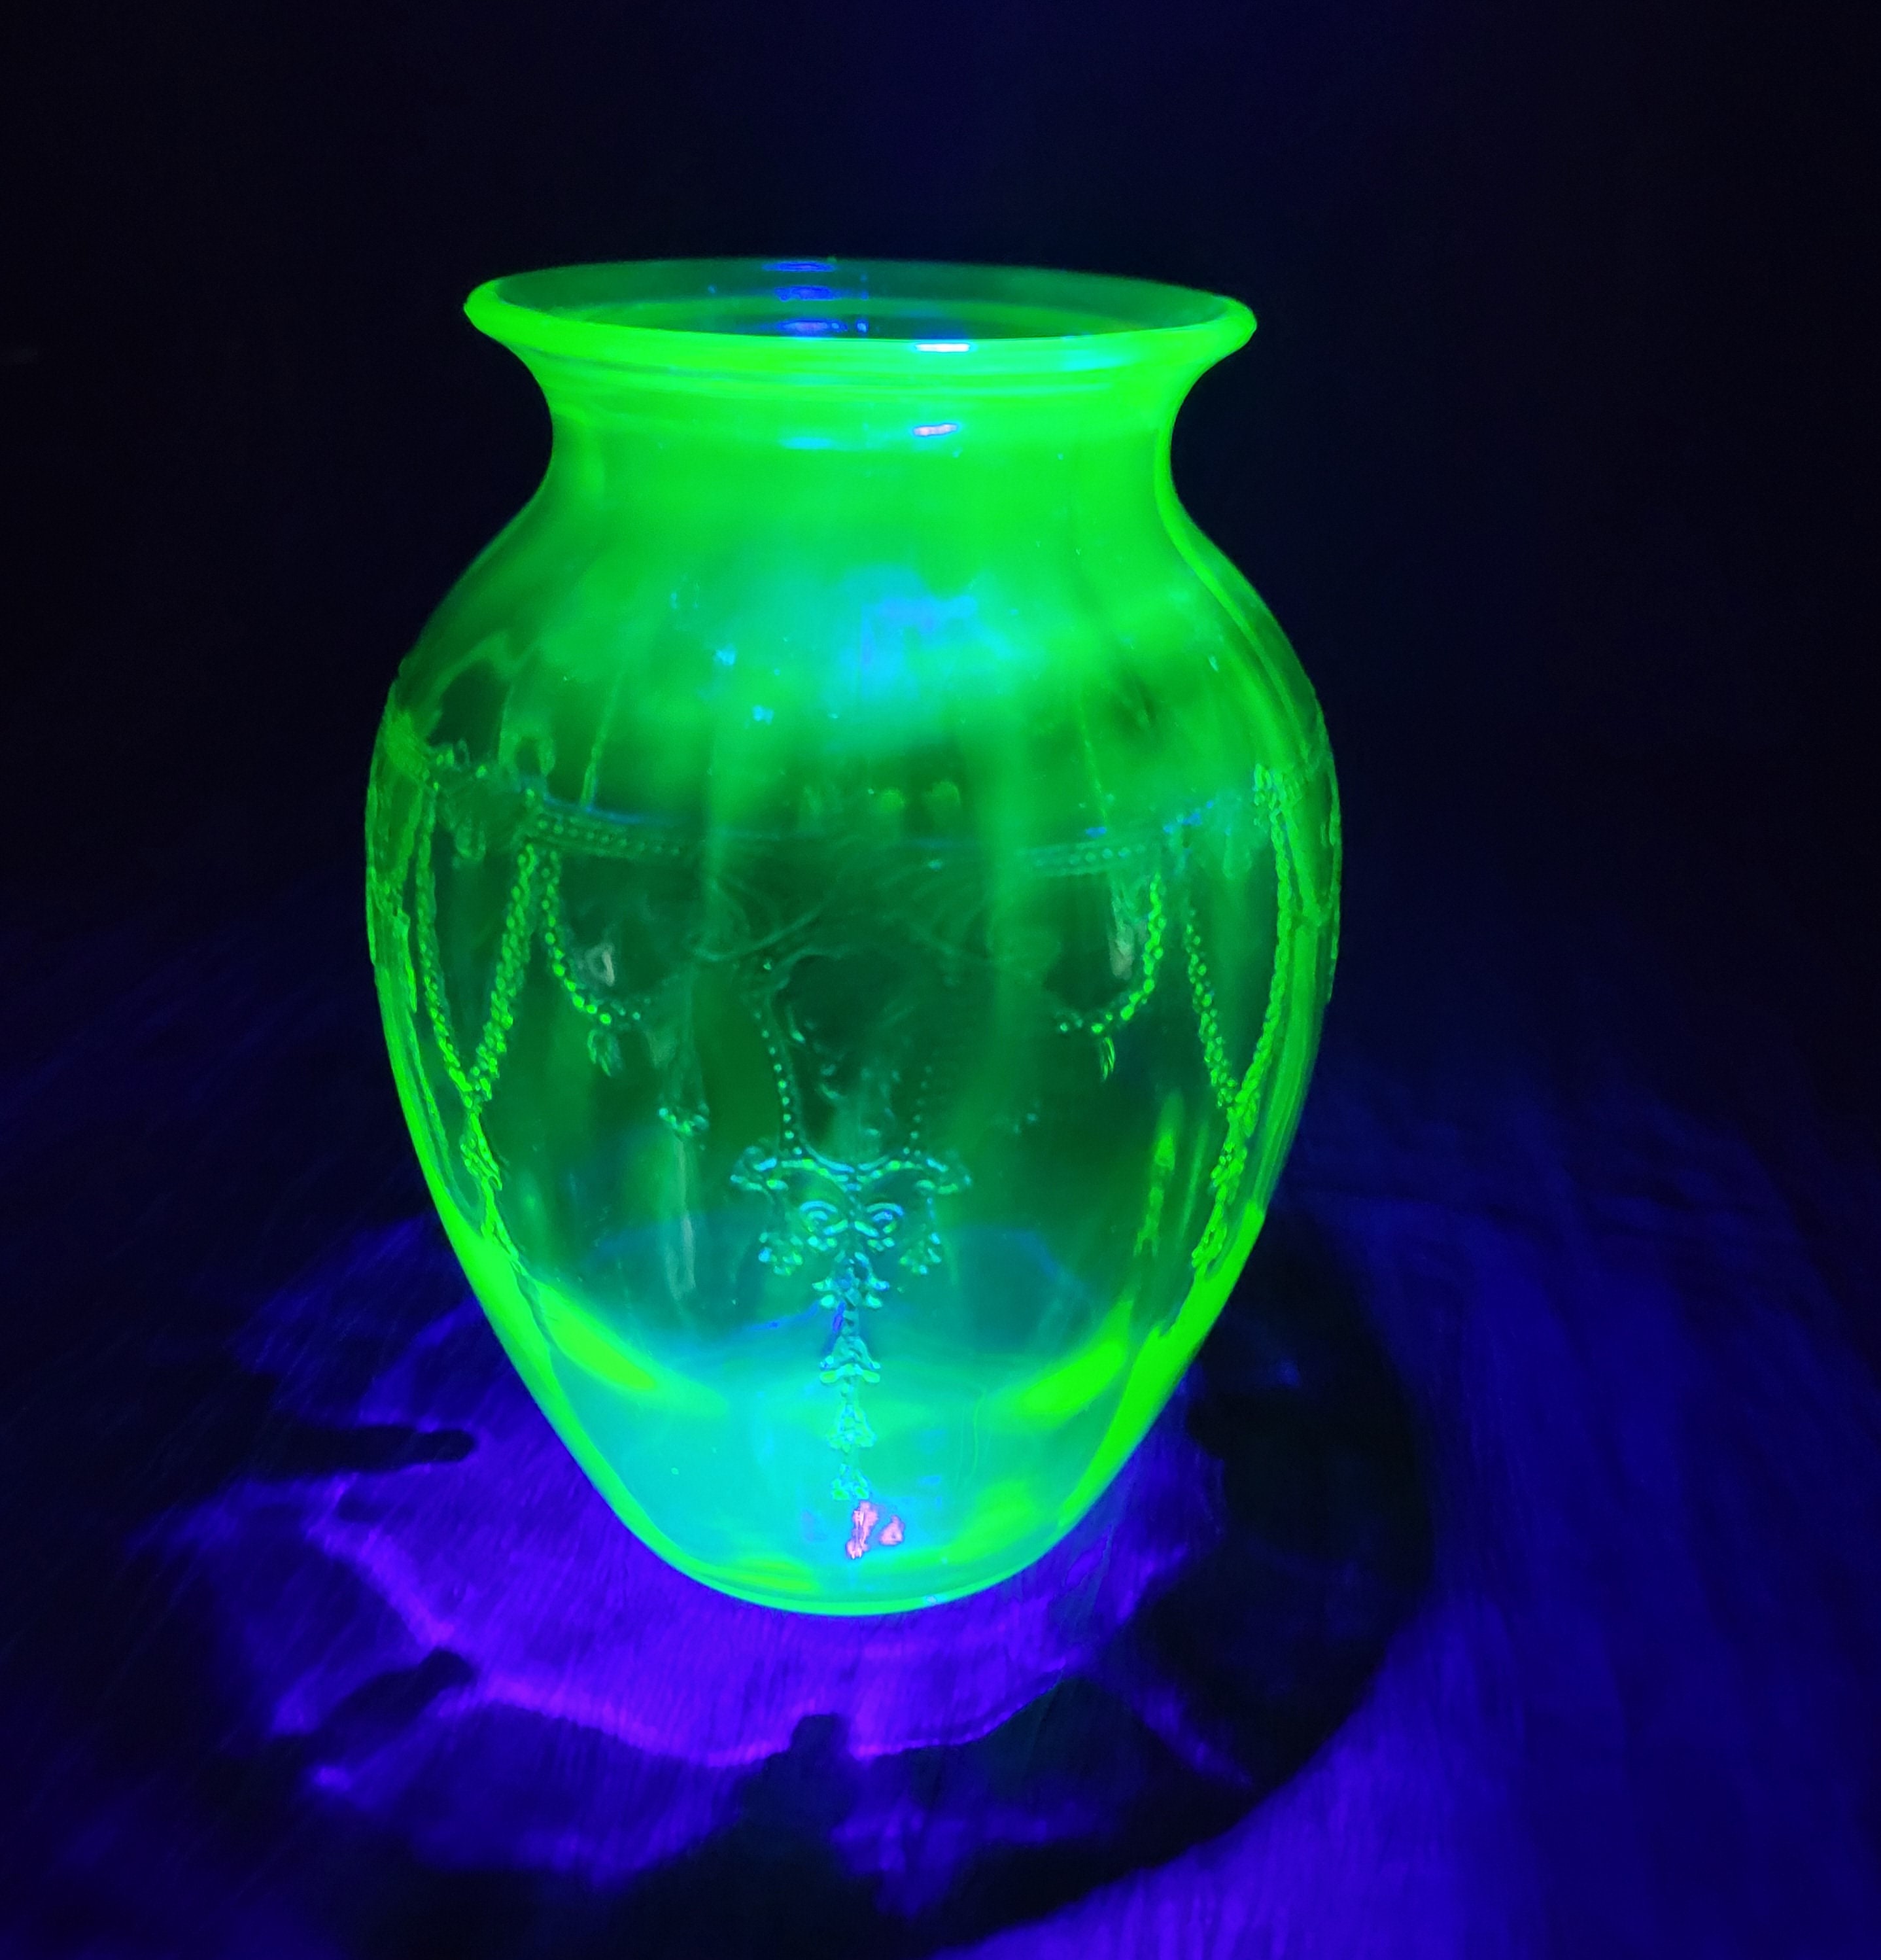 Large Glass French Jar Vase - 14.25 Tall